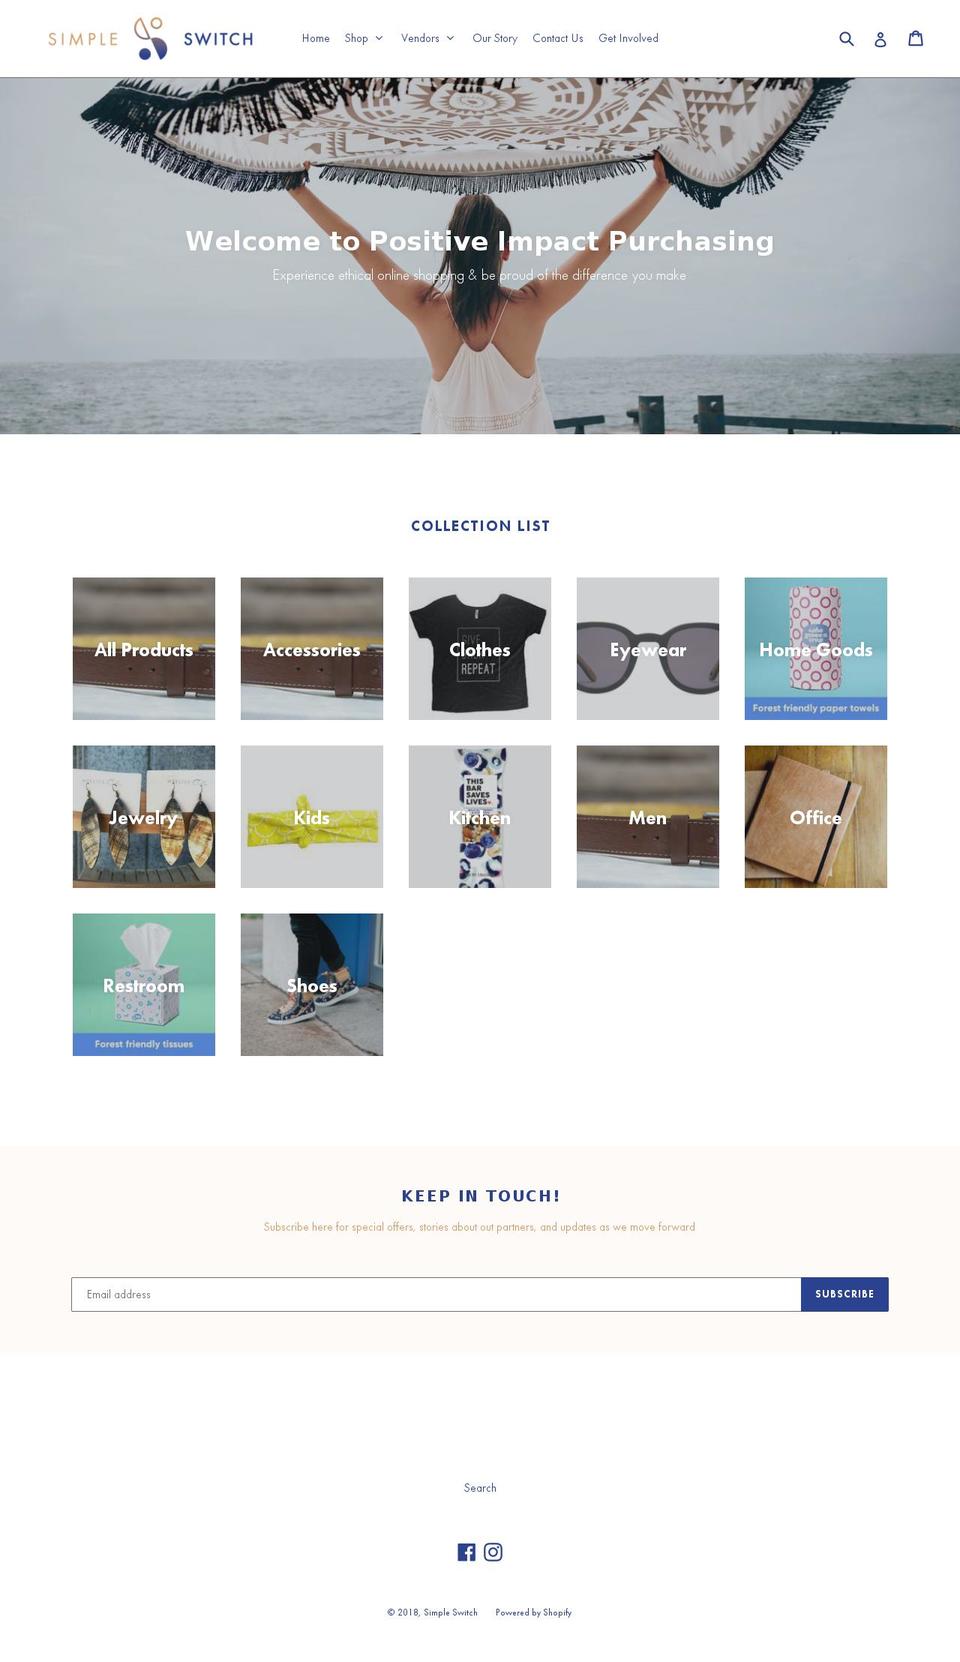 simpleswitch.org shopify website screenshot